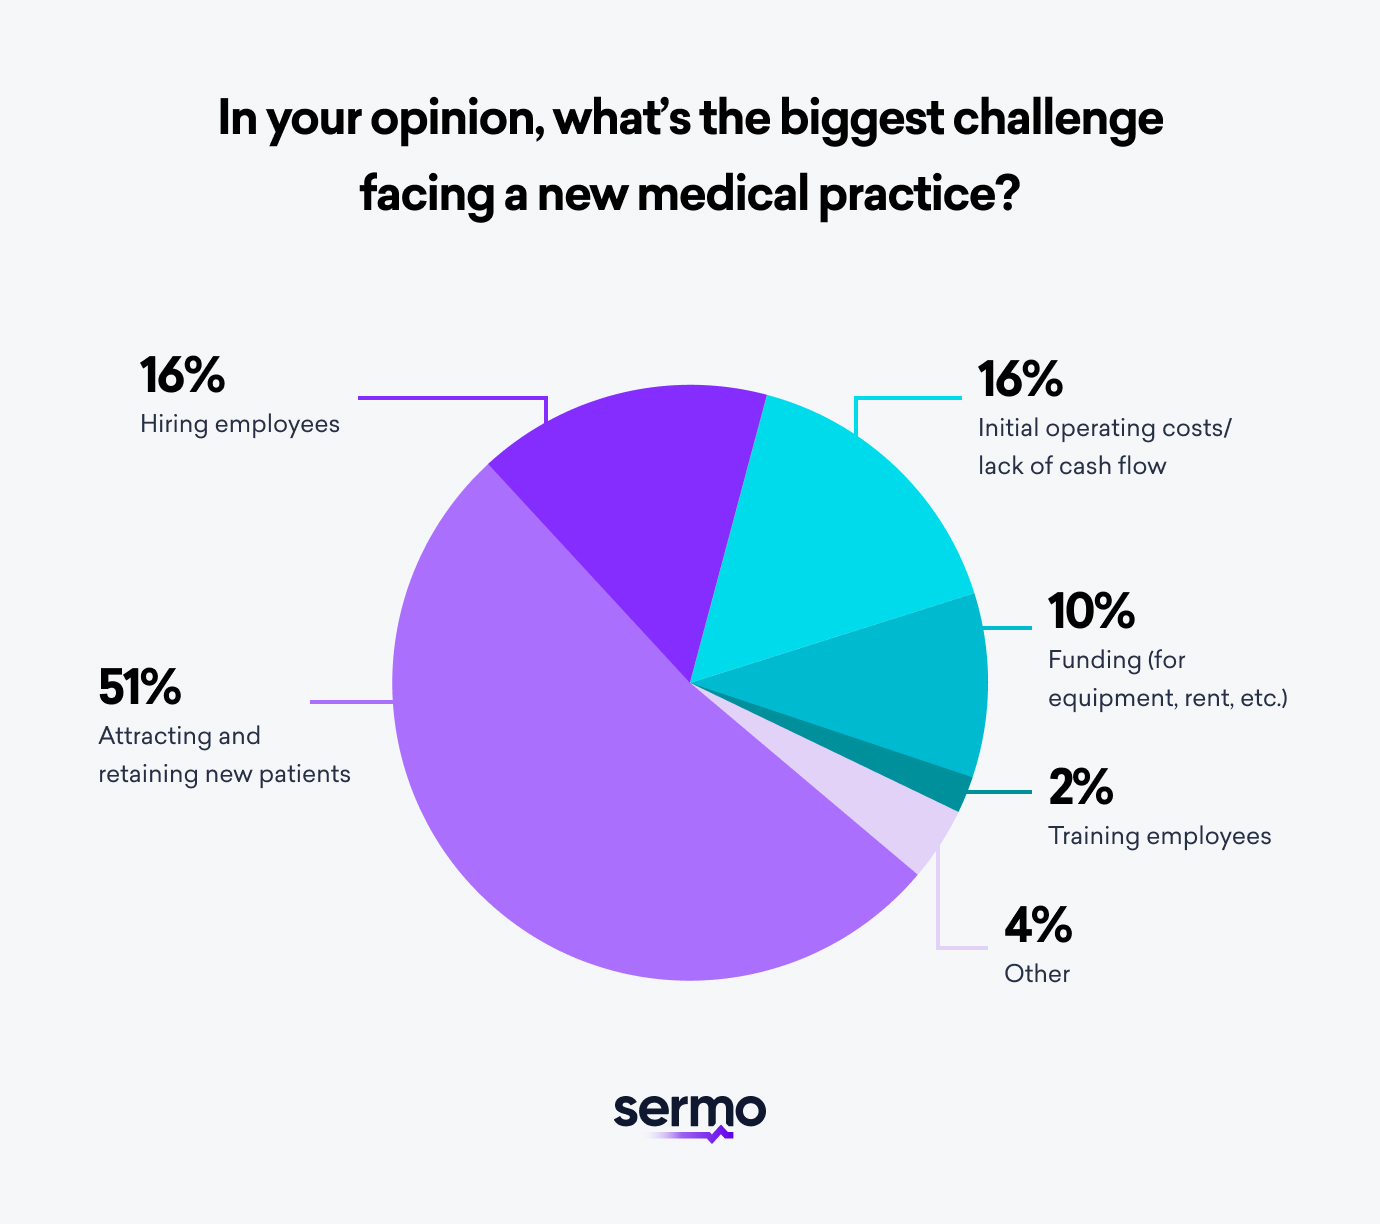 What’s the biggest factor in the success of a new medical practice according to physicians?